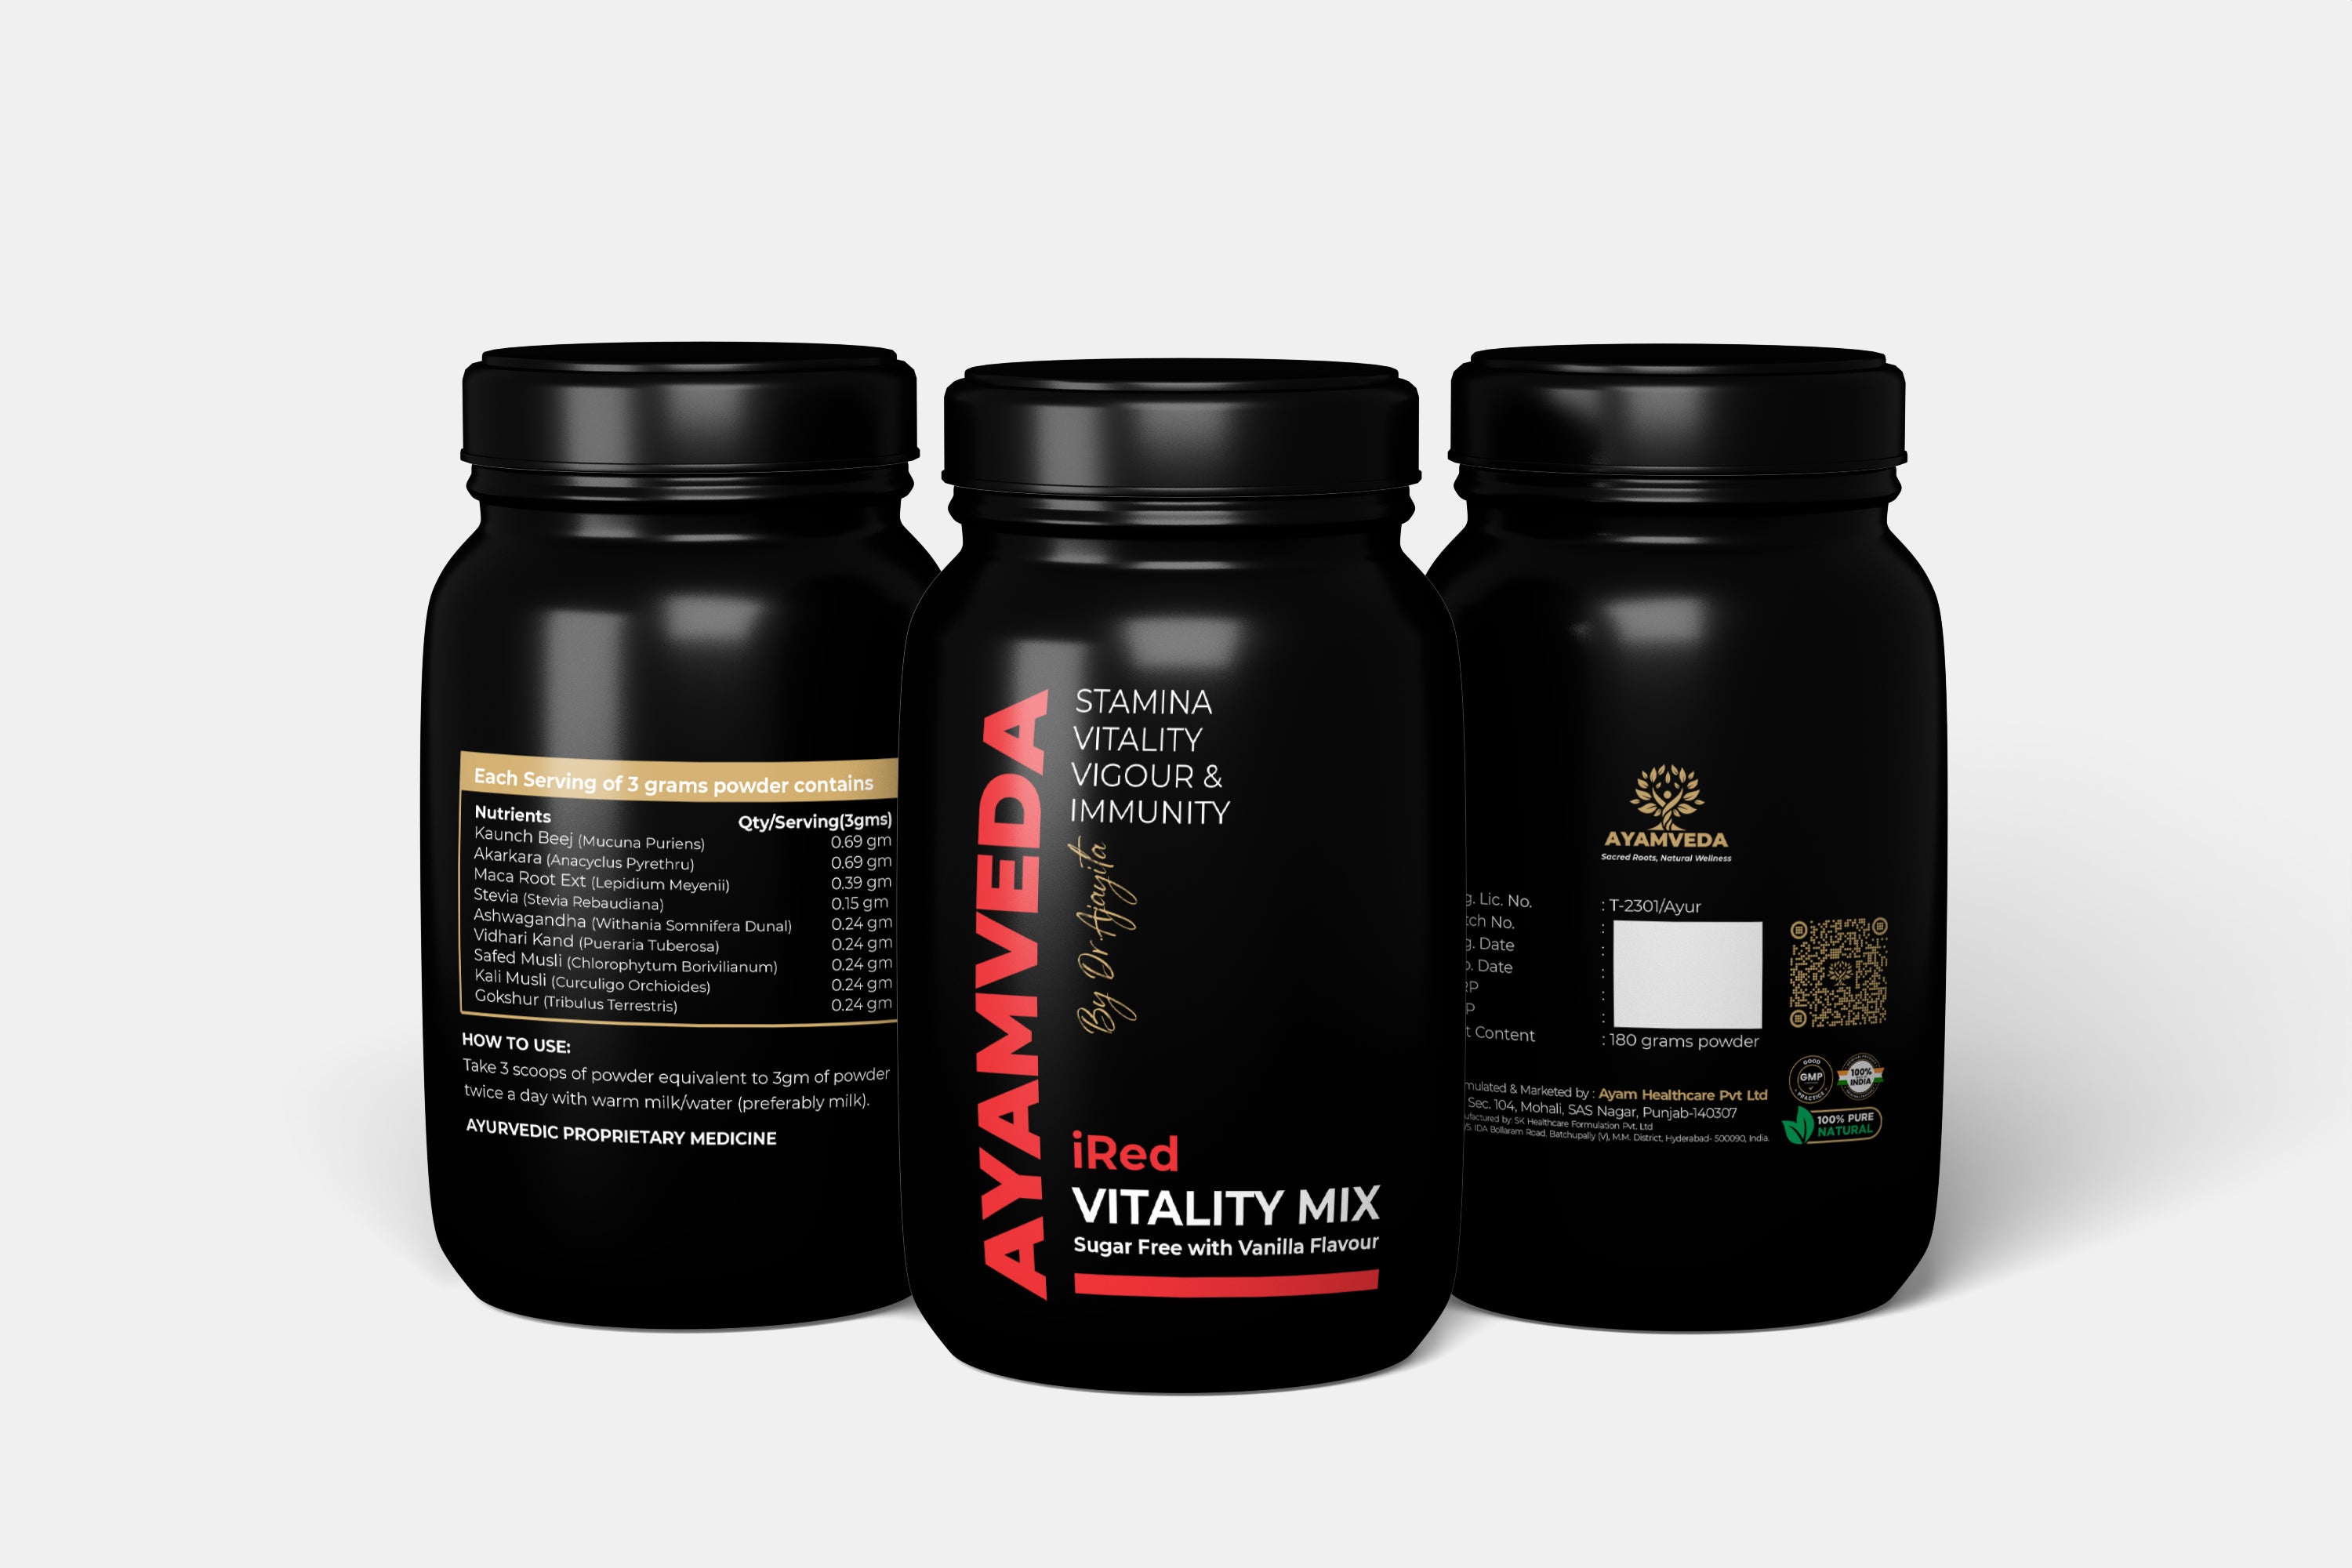 Dr. Ajayita's iRed Vitality Mix